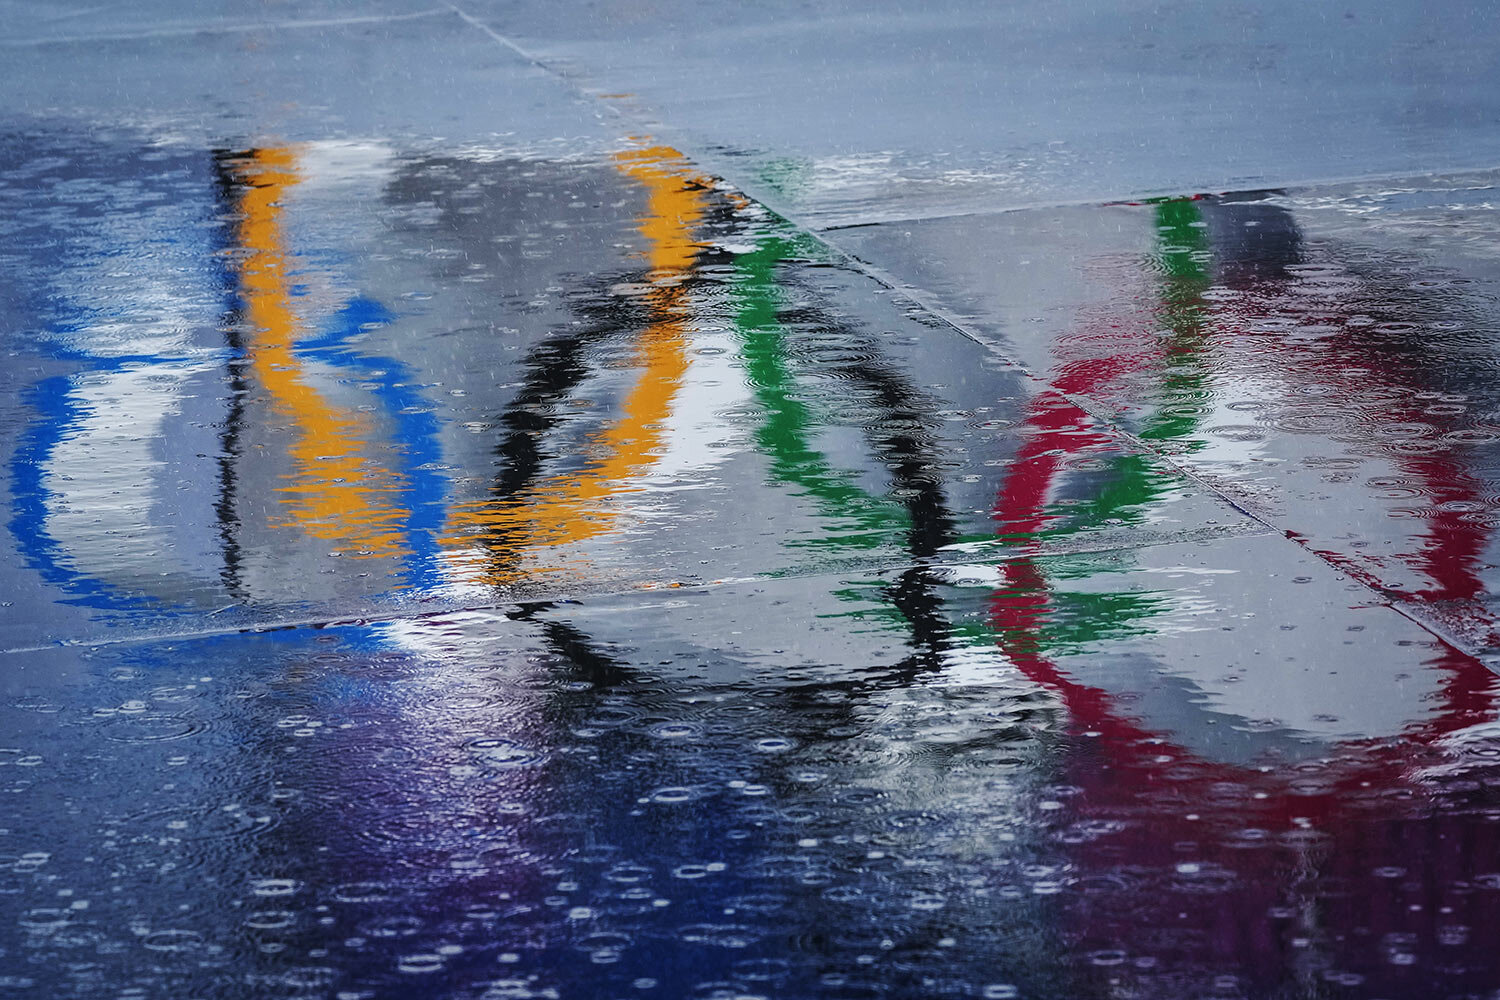  The Olympic rings are seen reflected in water at the BMX Freestyle course after a training session was cancelled due to rain, at the 2020 Summer Olympics, Tuesday, July 27, 2021, in Tokyo, Japan. (AP Photo/Ben Curtis) 